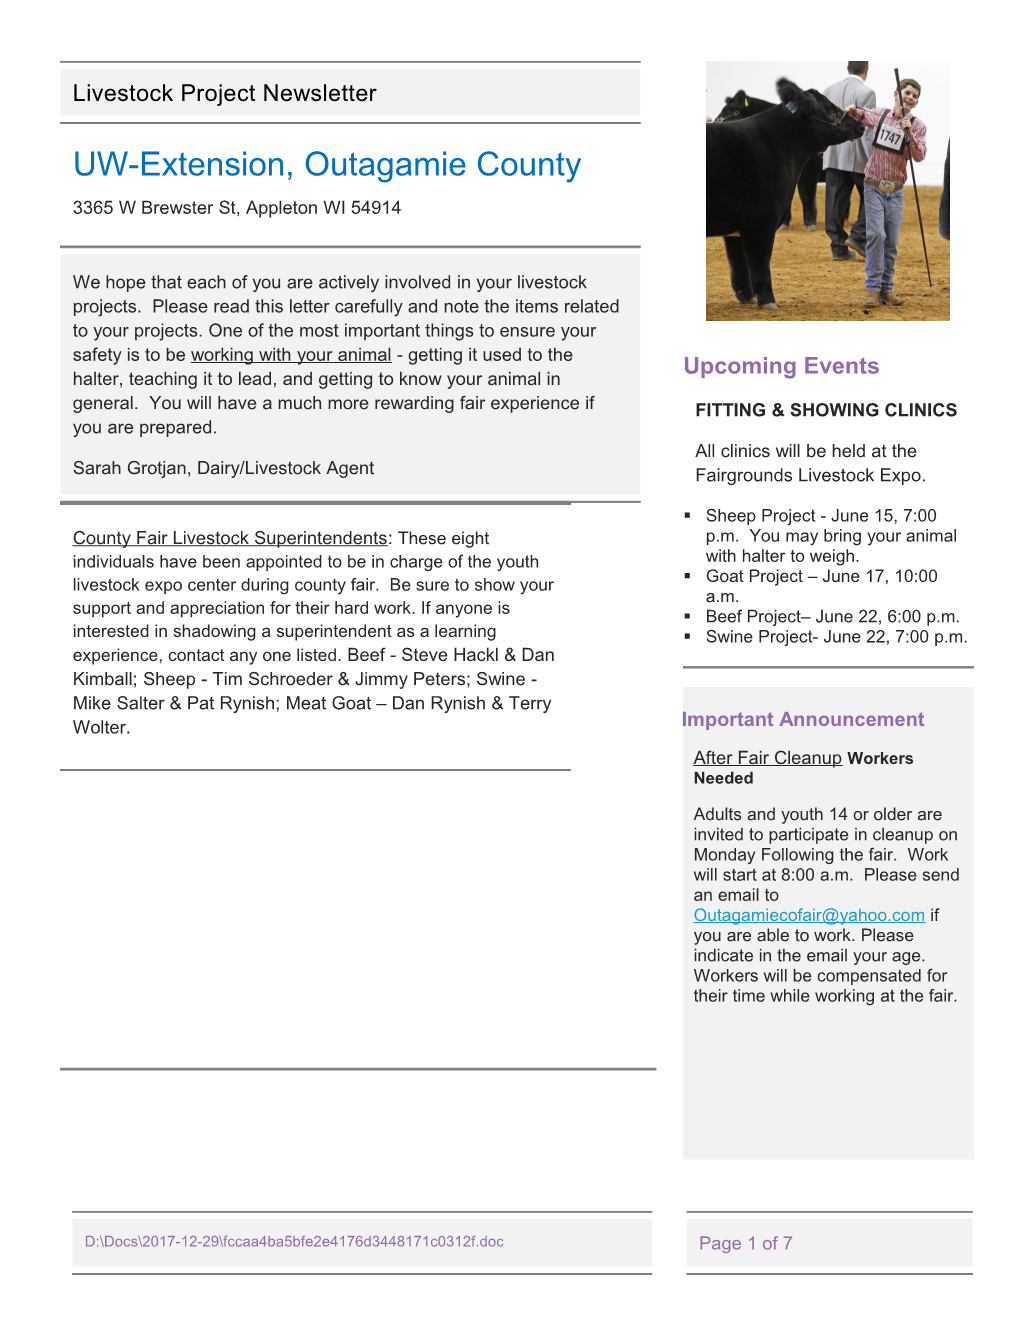 UW-Extension, Outagamie County